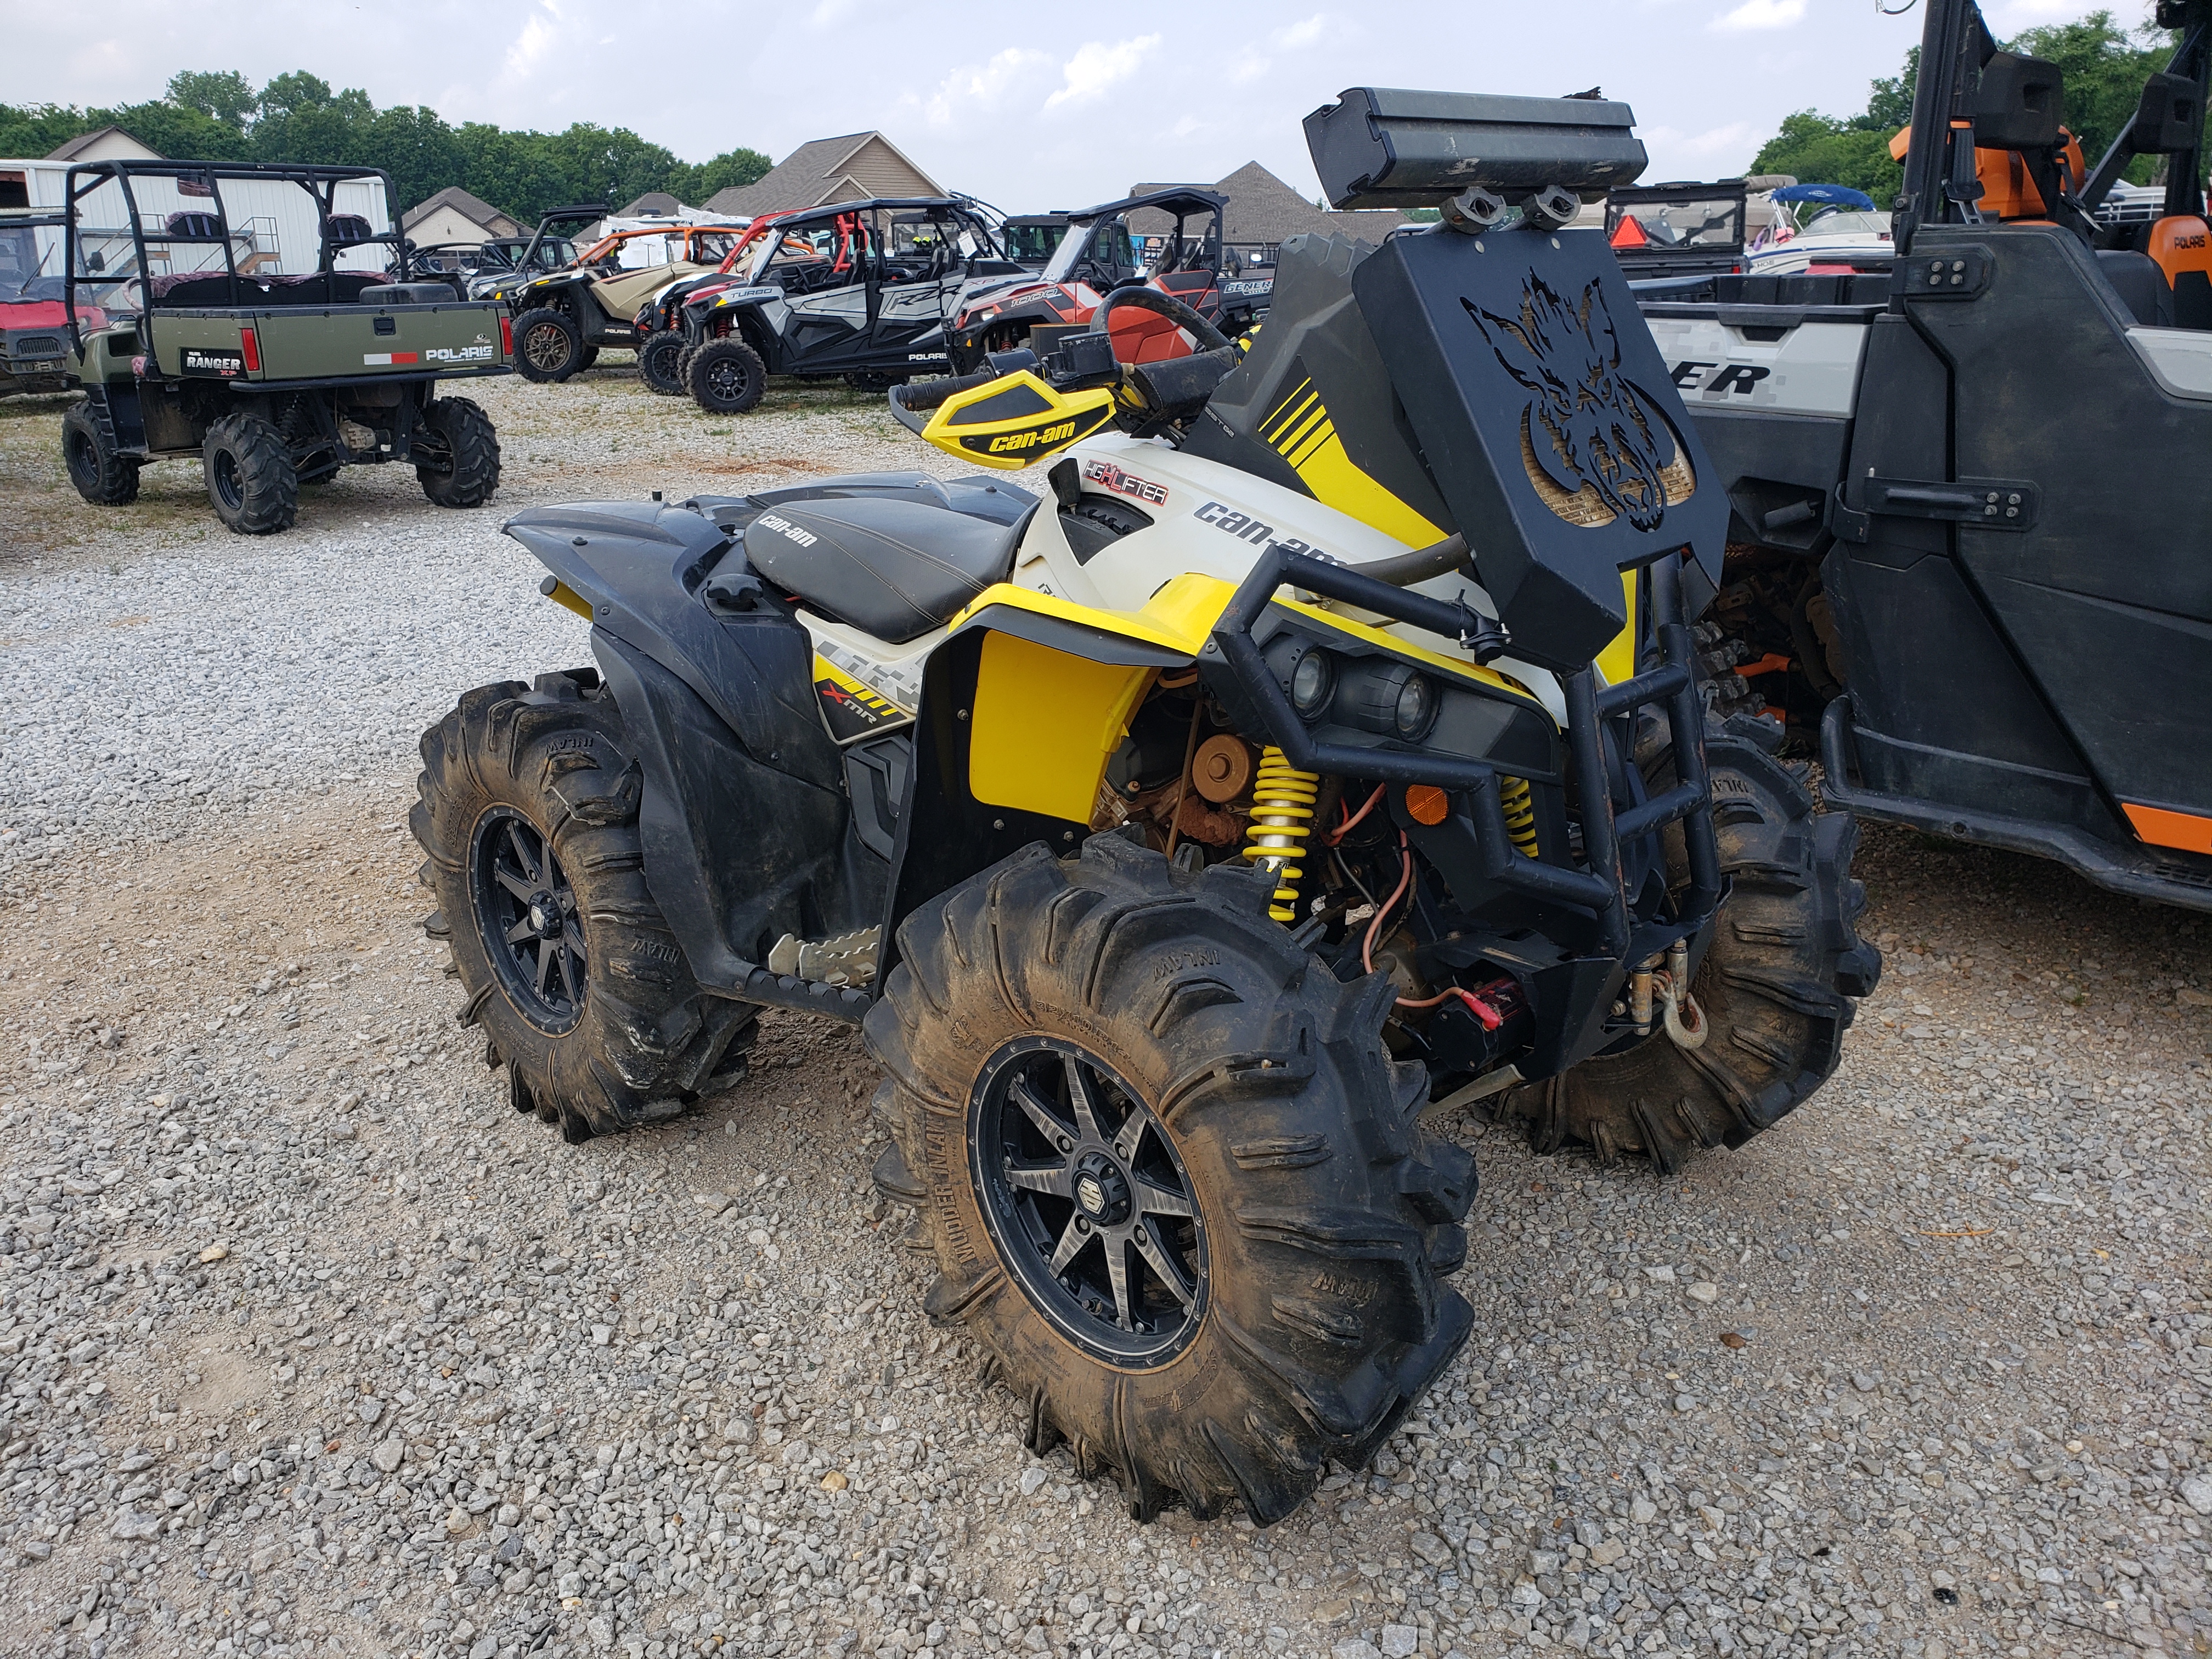 2019 Can-Am Renegade X mr 570 at Shoals Outdoor Sports